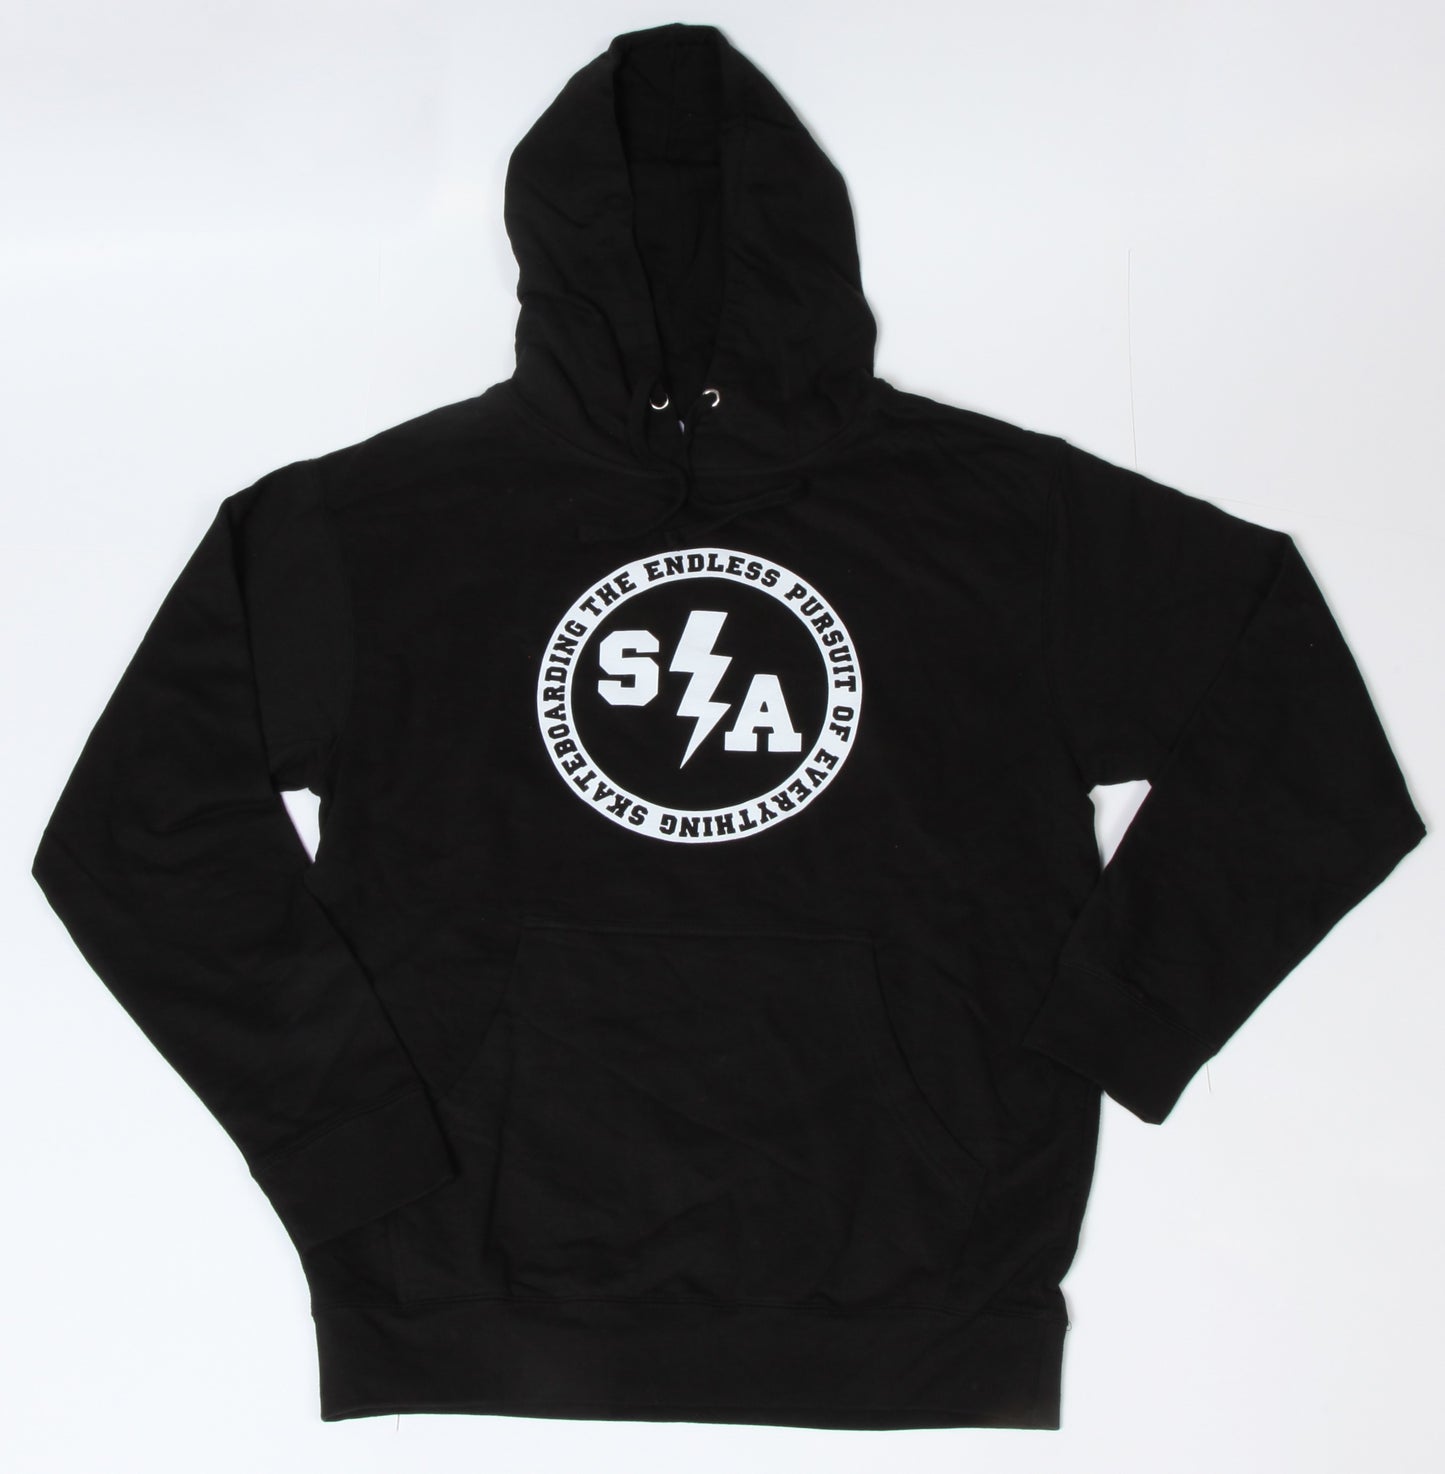 Skaters Advocate Endless Pursuit / Consolidated Support Your Local Skateshop Hoodie